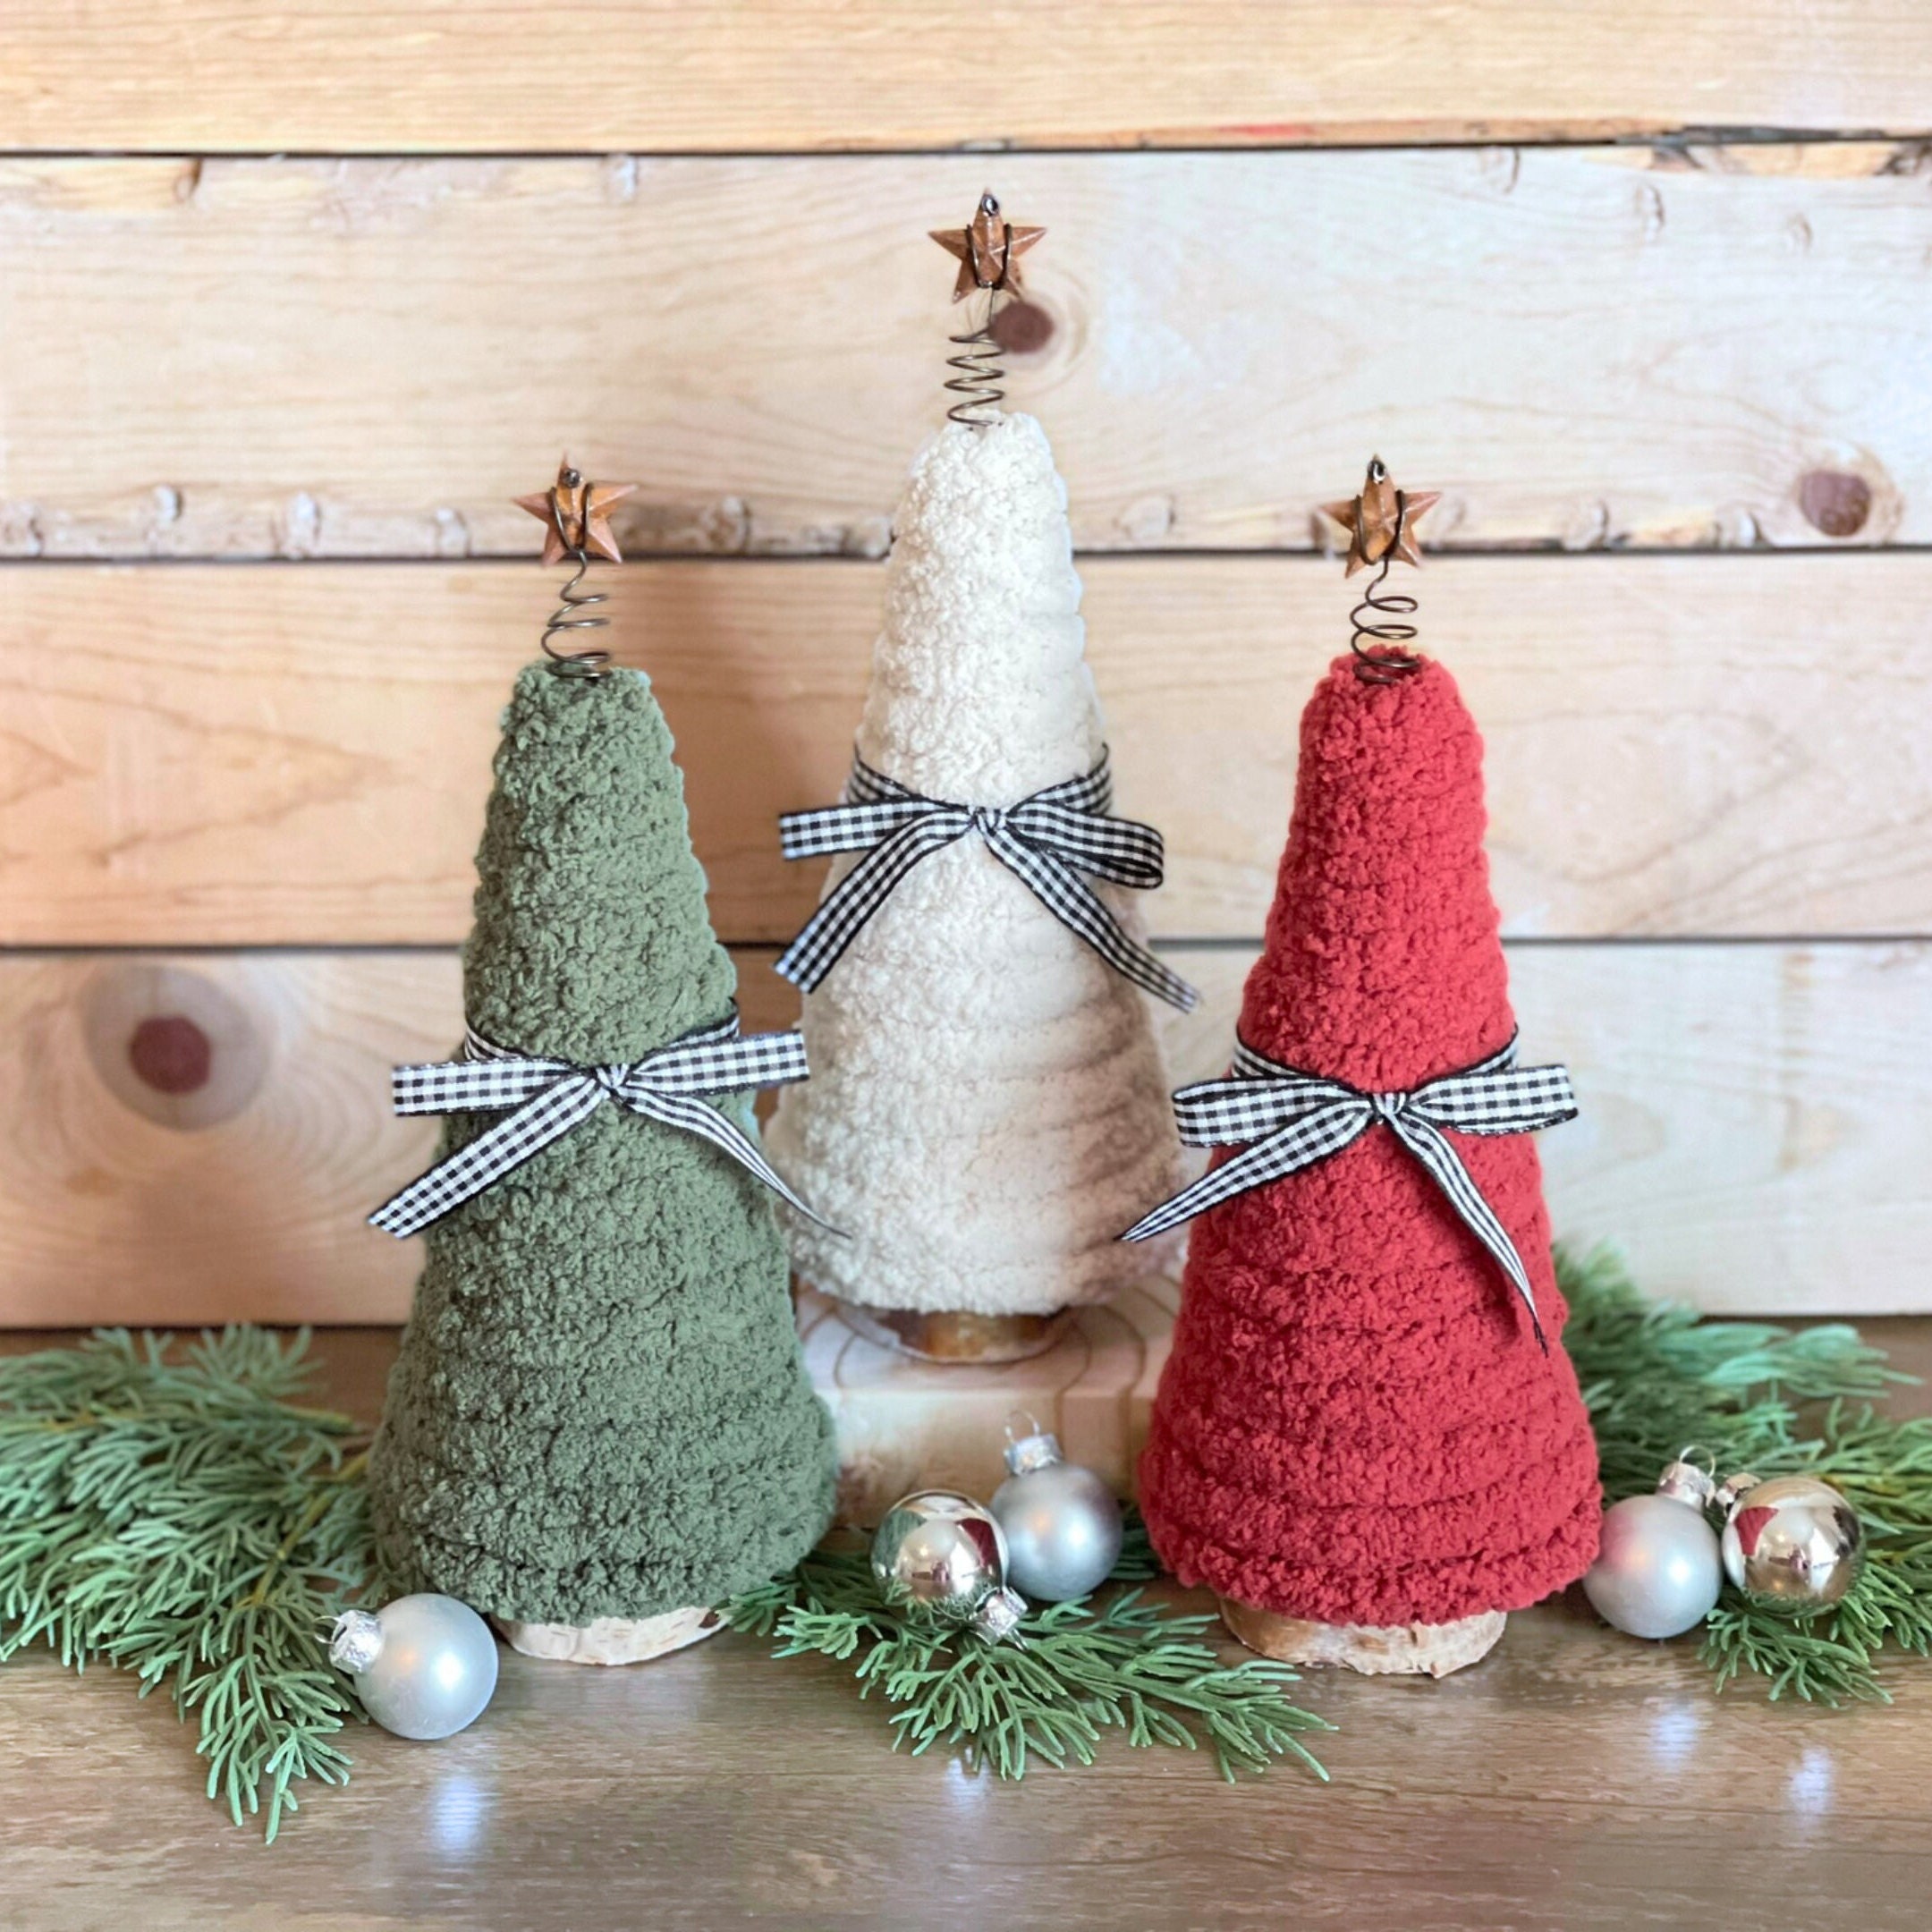 Yarn Christmas Trees With Black and White Bow and Rusty Star